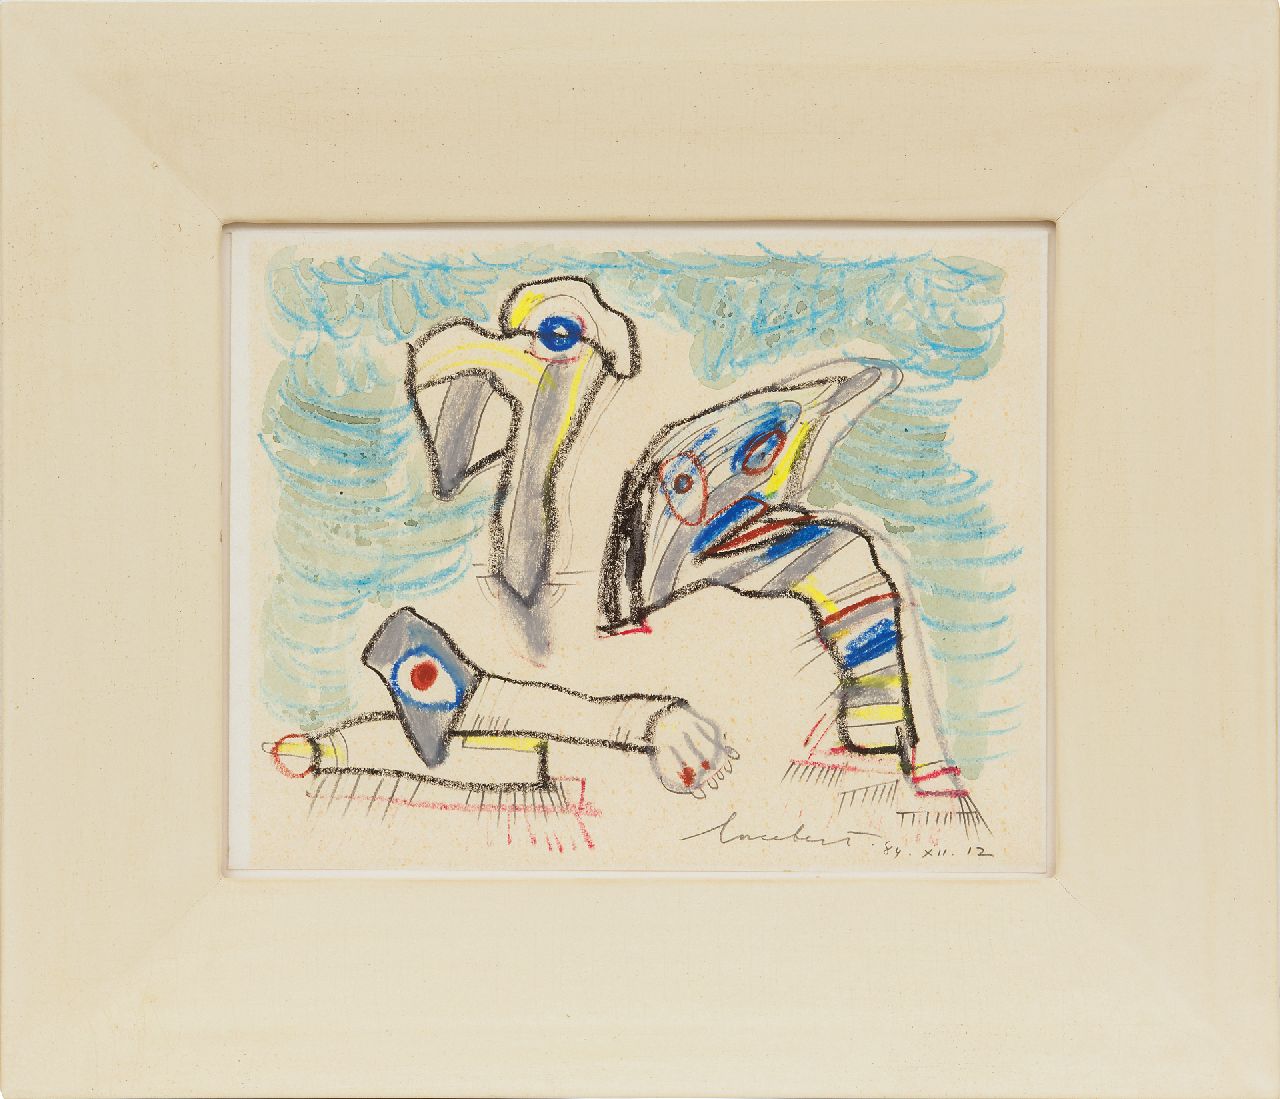 Lucebert (Lubertus Jacobus Swaanswijk)   | Lucebert (Lubertus Jacobus Swaanswijk) | Watercolours and drawings offered for sale | Three creatures, pencil, chalk and watercolour on paper 20.9 x 26.7 cm, signed l.r. and dated 84.XII.12